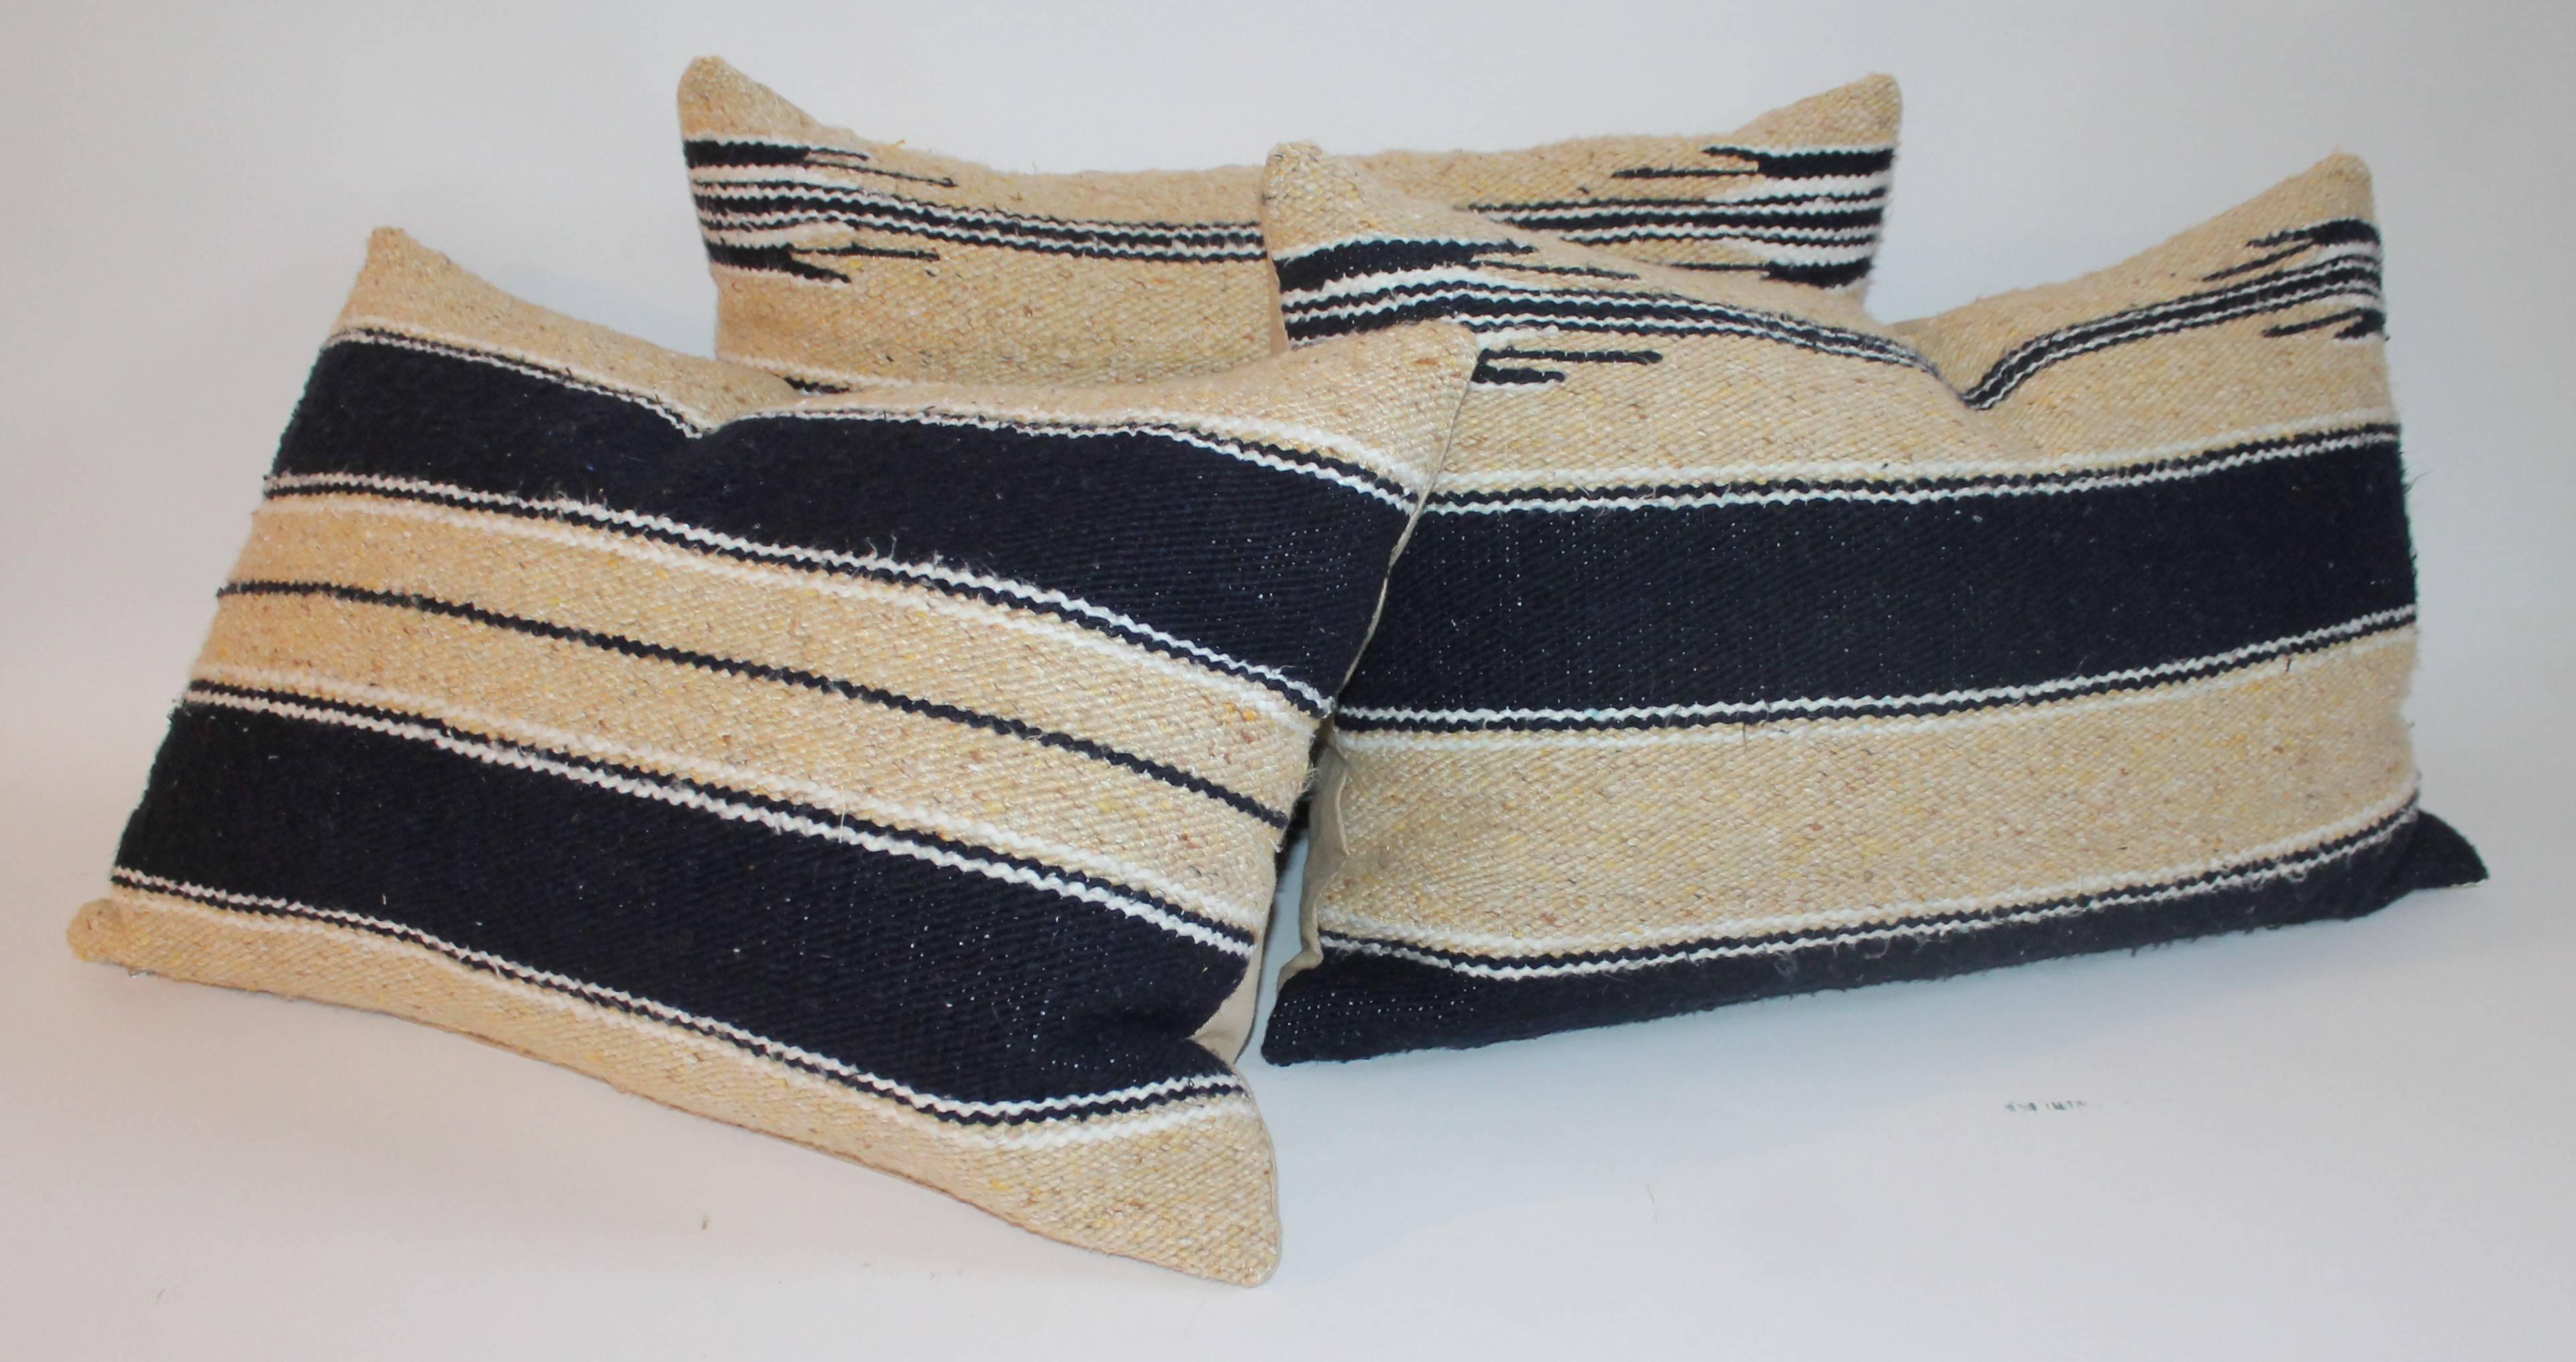 These three American Indian saddle blanket bolster pillows are in fine condition and have golden cotton linen backing. The trio are in navy blue and creamy yellow soft wool. The inserts are down and feather fill.